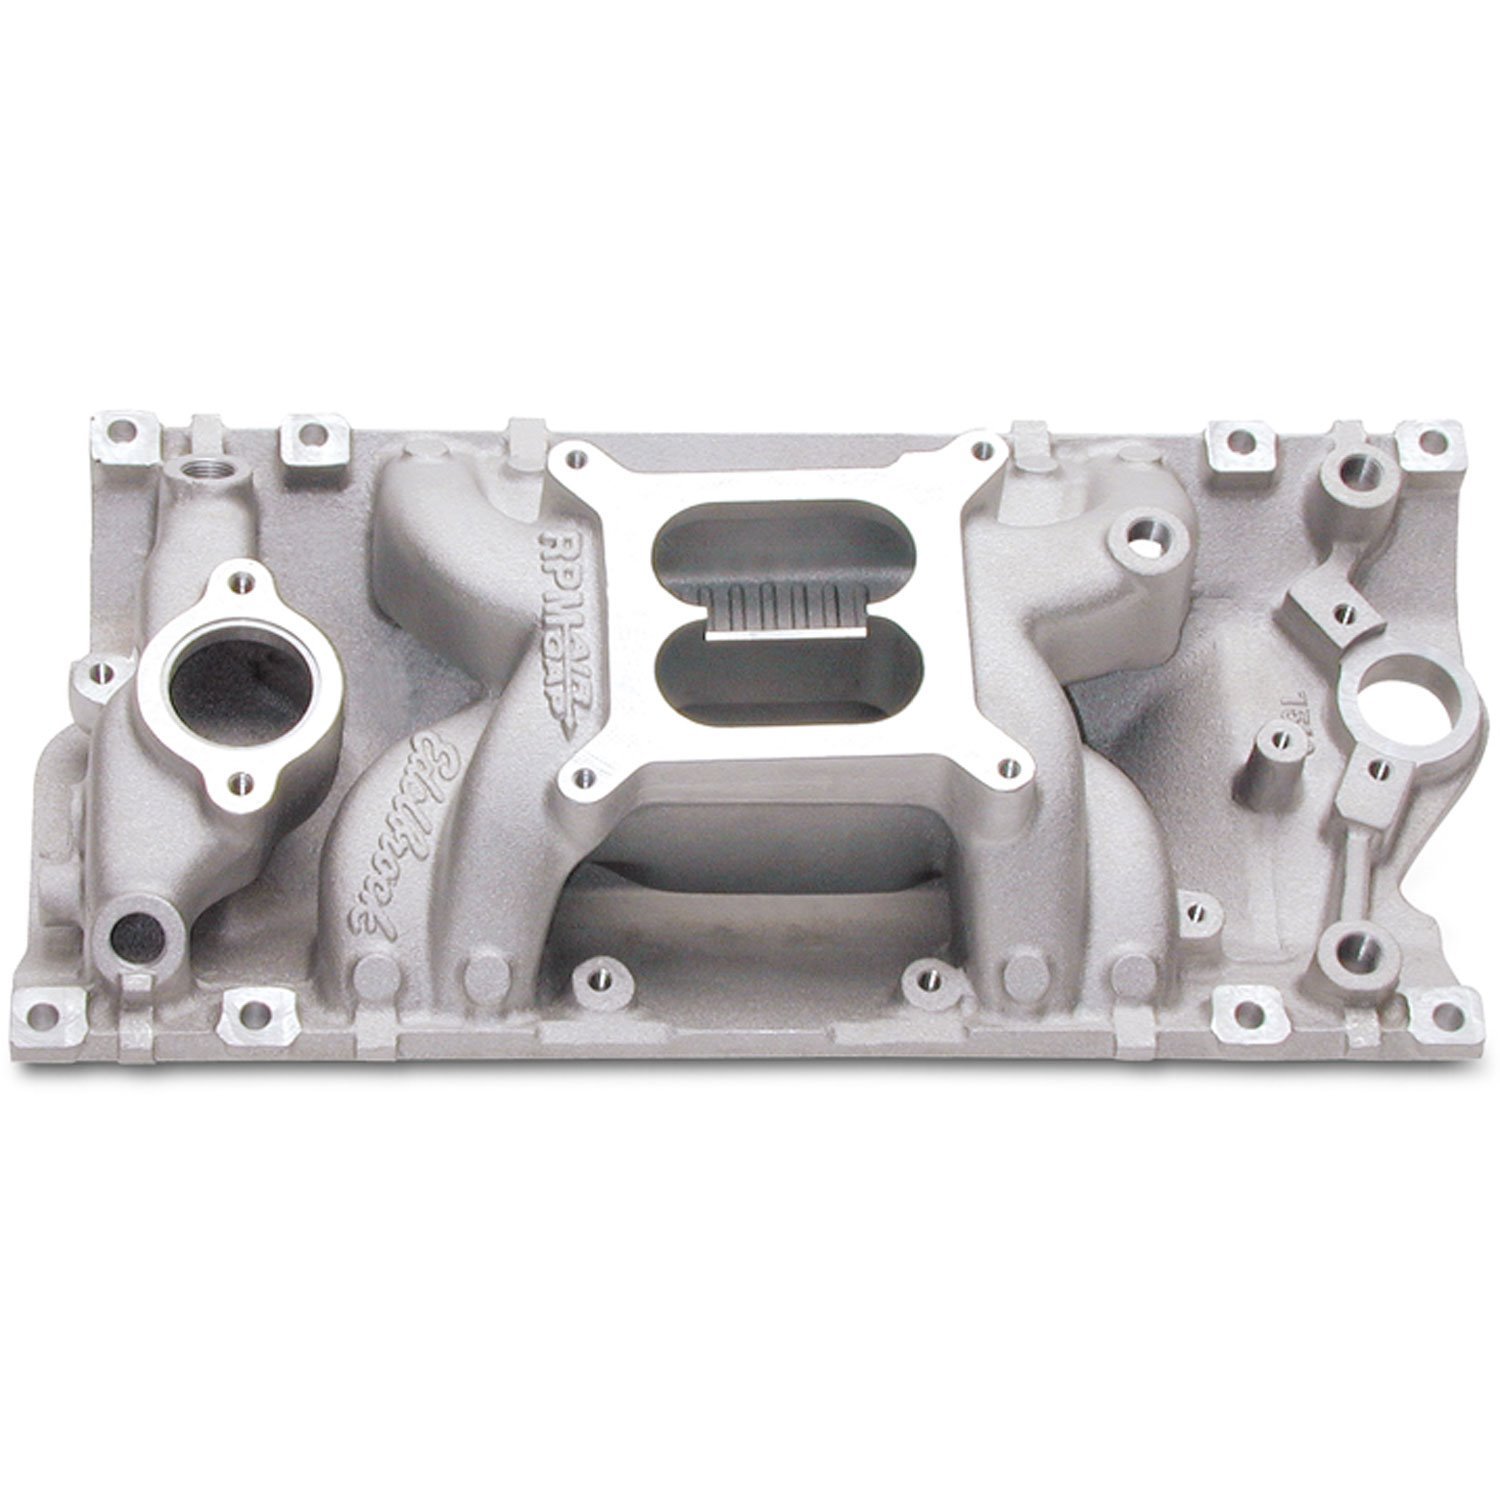 RPM Air-Gap Vortec Intake Manifold for Small Block Chevy with Vortec/E-Tec Heads